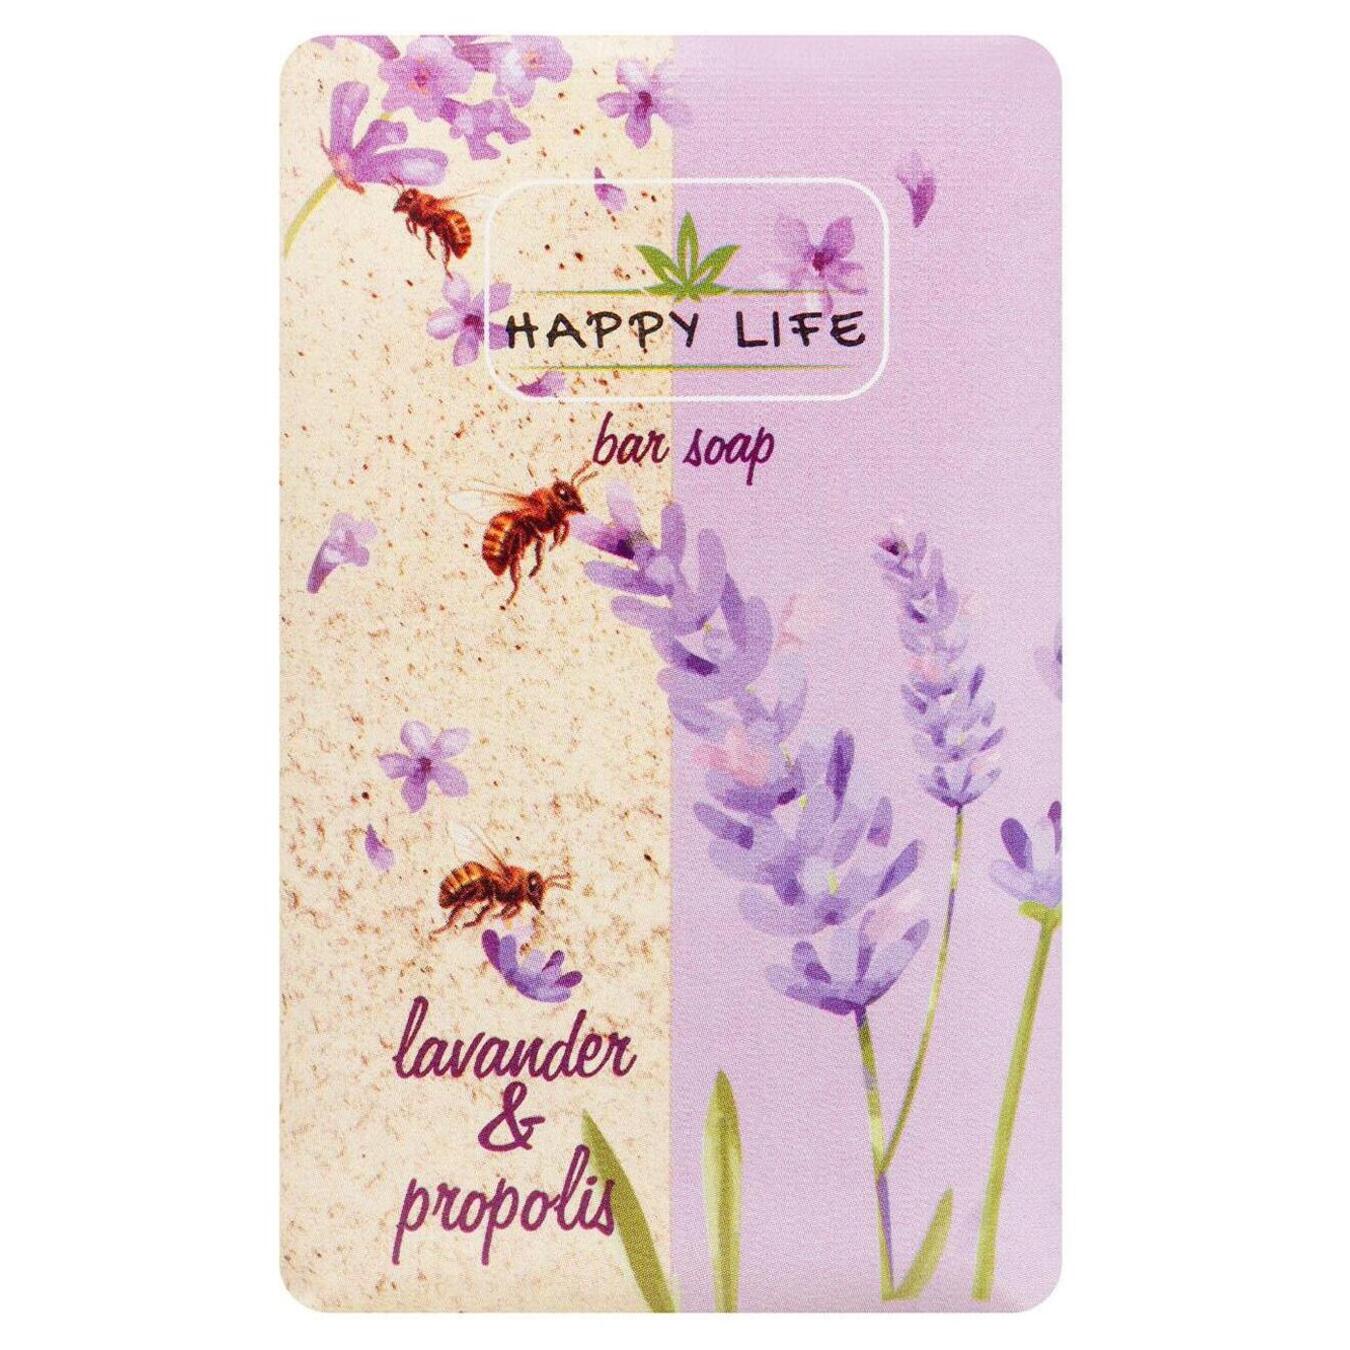 Happy Life solid soap lavender and propolis 180g